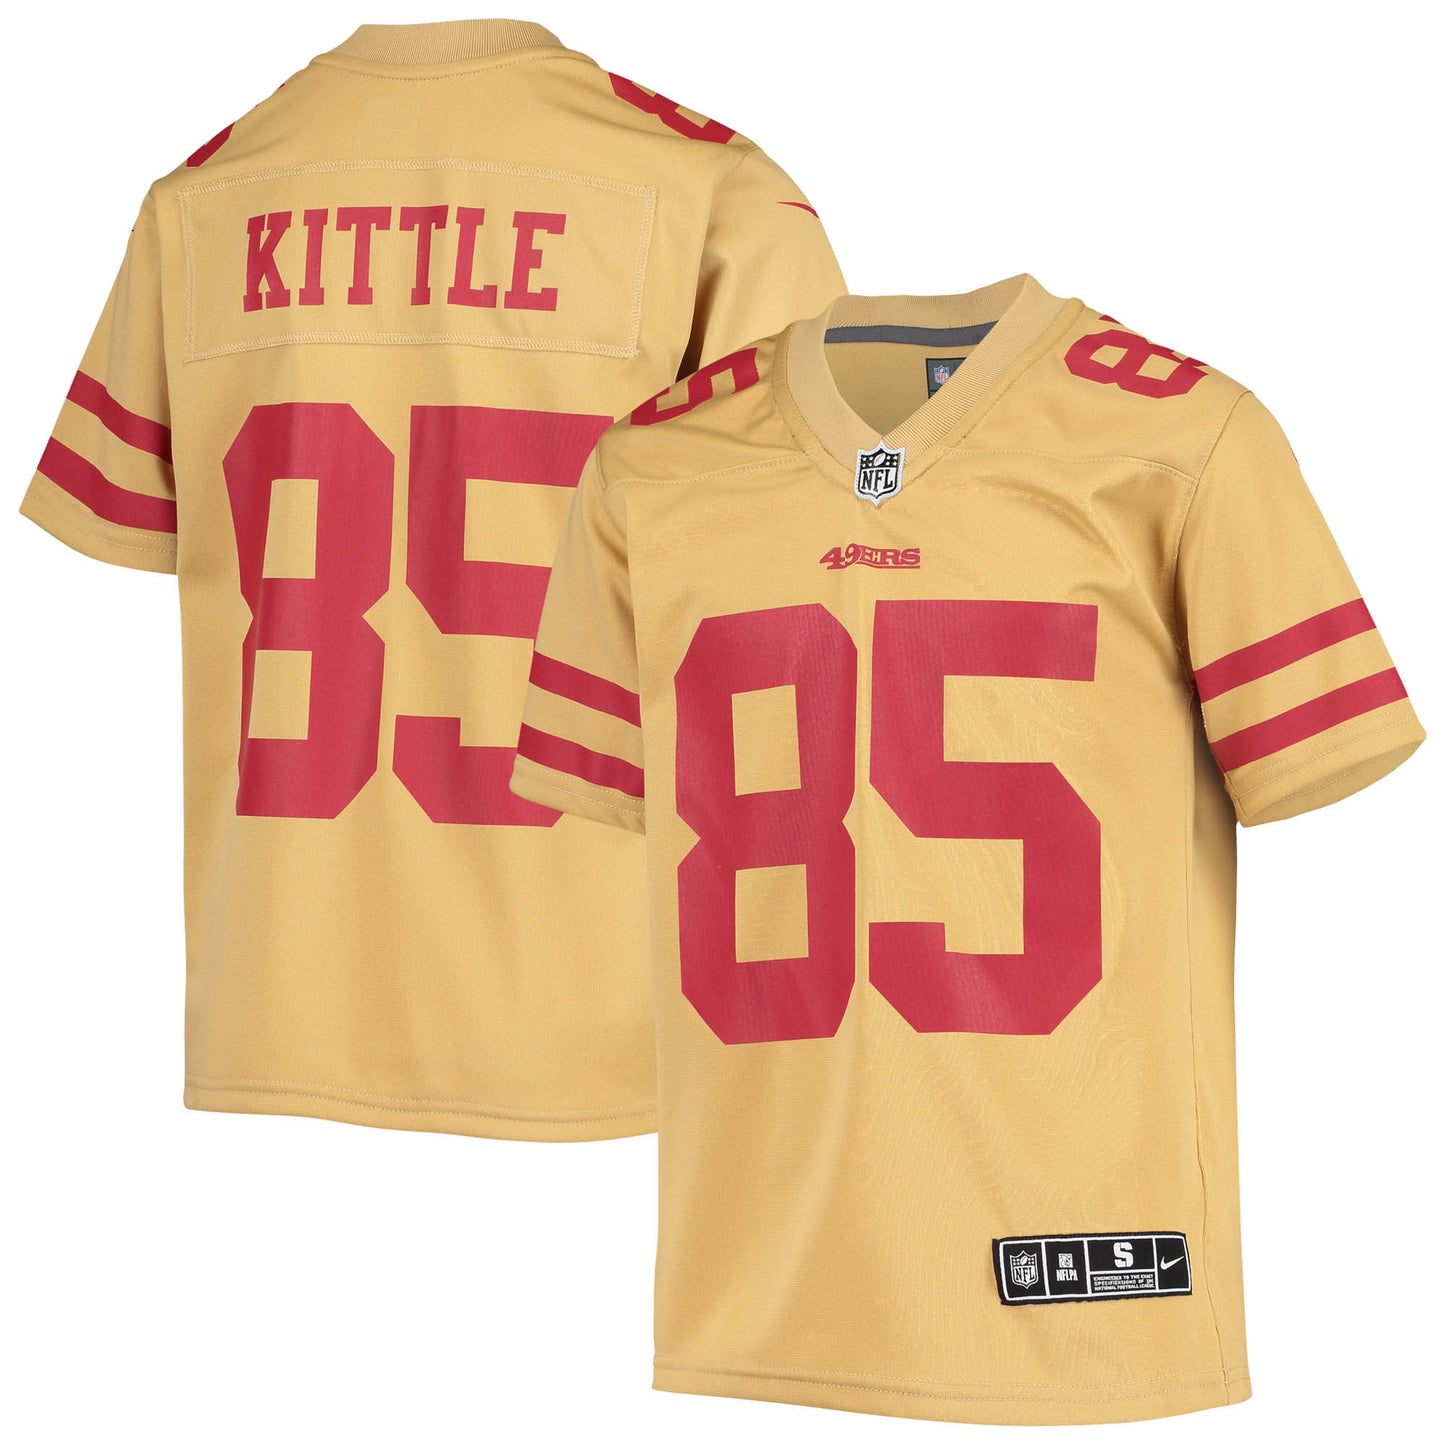 George Kittle San Francisco 49ers Nike Youth Inverted Team Game Jersey - Gold